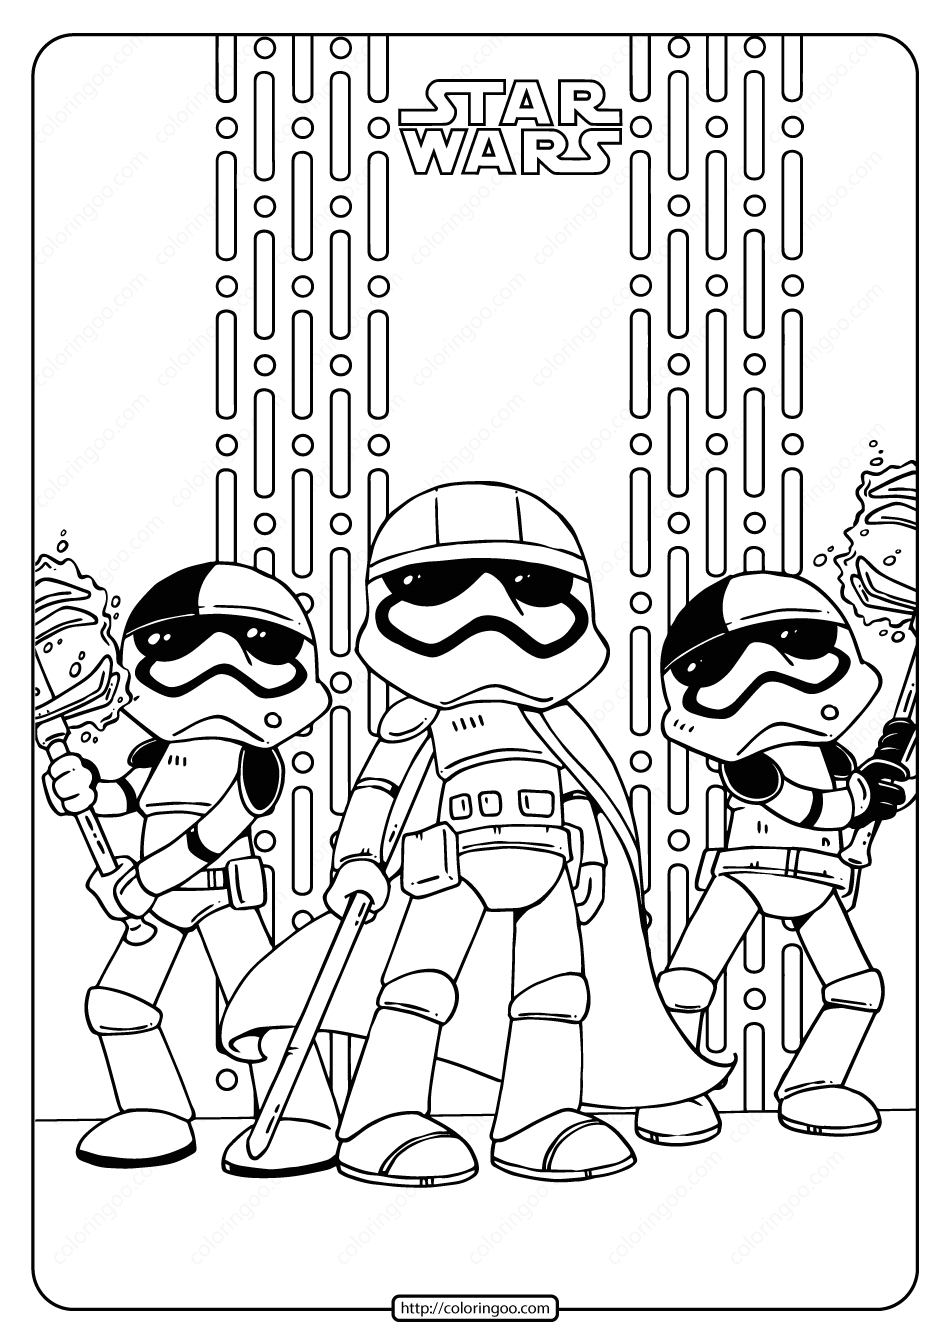 Printable Star Wars Captain Phasma Coloring Pages